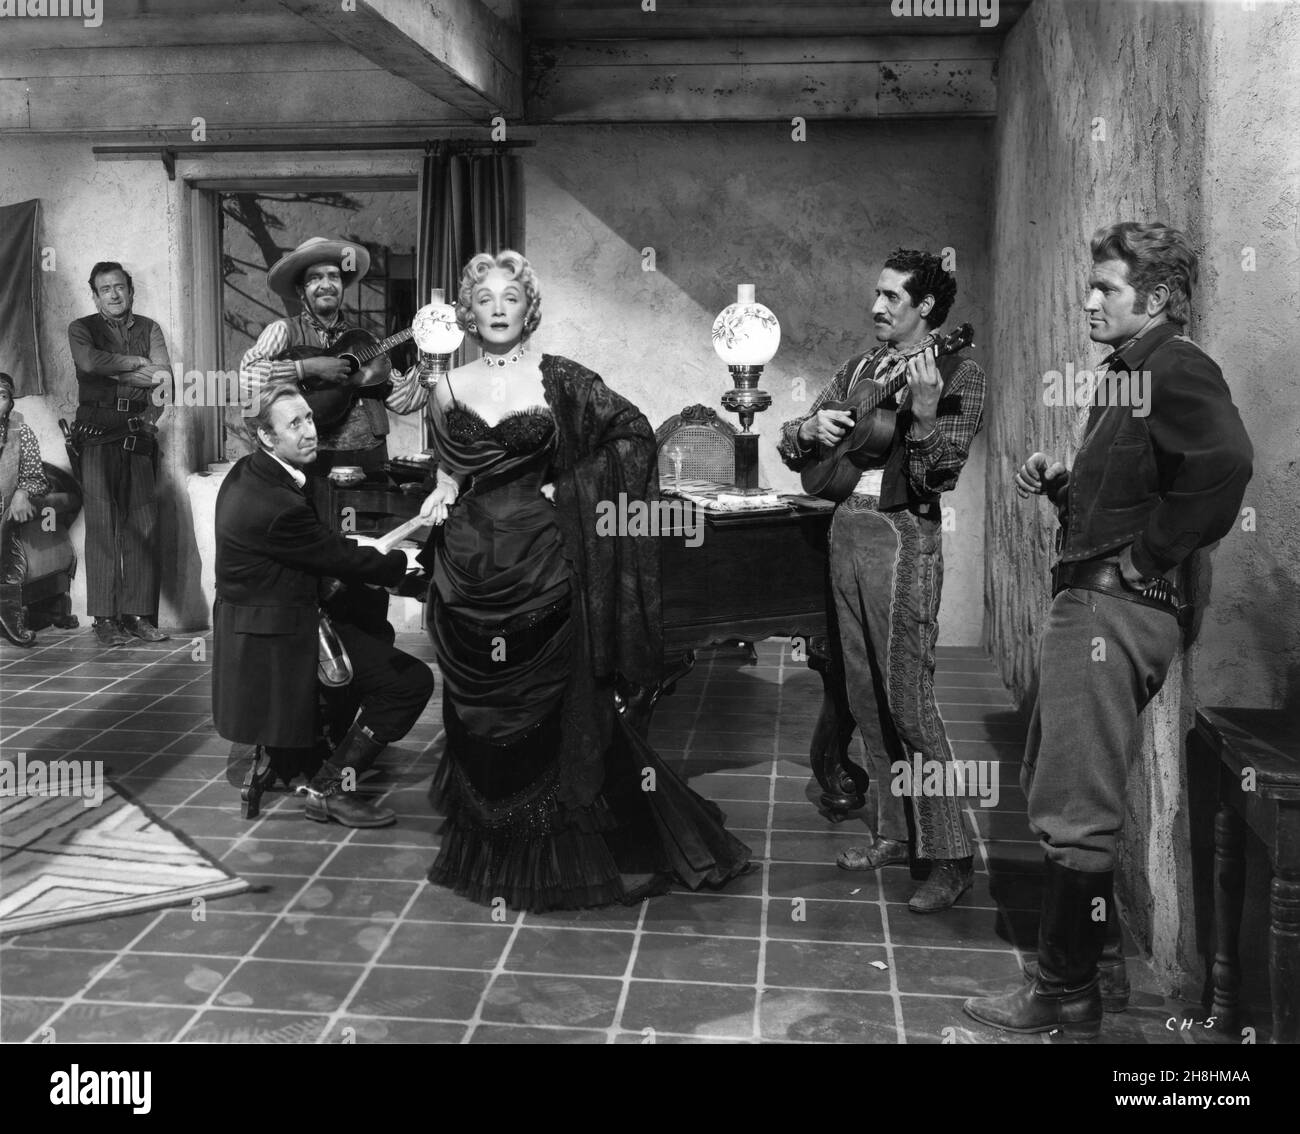 FRANK FERGUSON MARLENE DIETRICH and JOE DOMINGUEZ in RANCHO NOTORIOUS 1952 director FRITZ LANG original story Silvia Richards screenplay Daniel Taradash wardrobe design for Miss Dietrich Don Loper Fidelity Pictures Corporation / RKO Radio Pictures Stock Photo